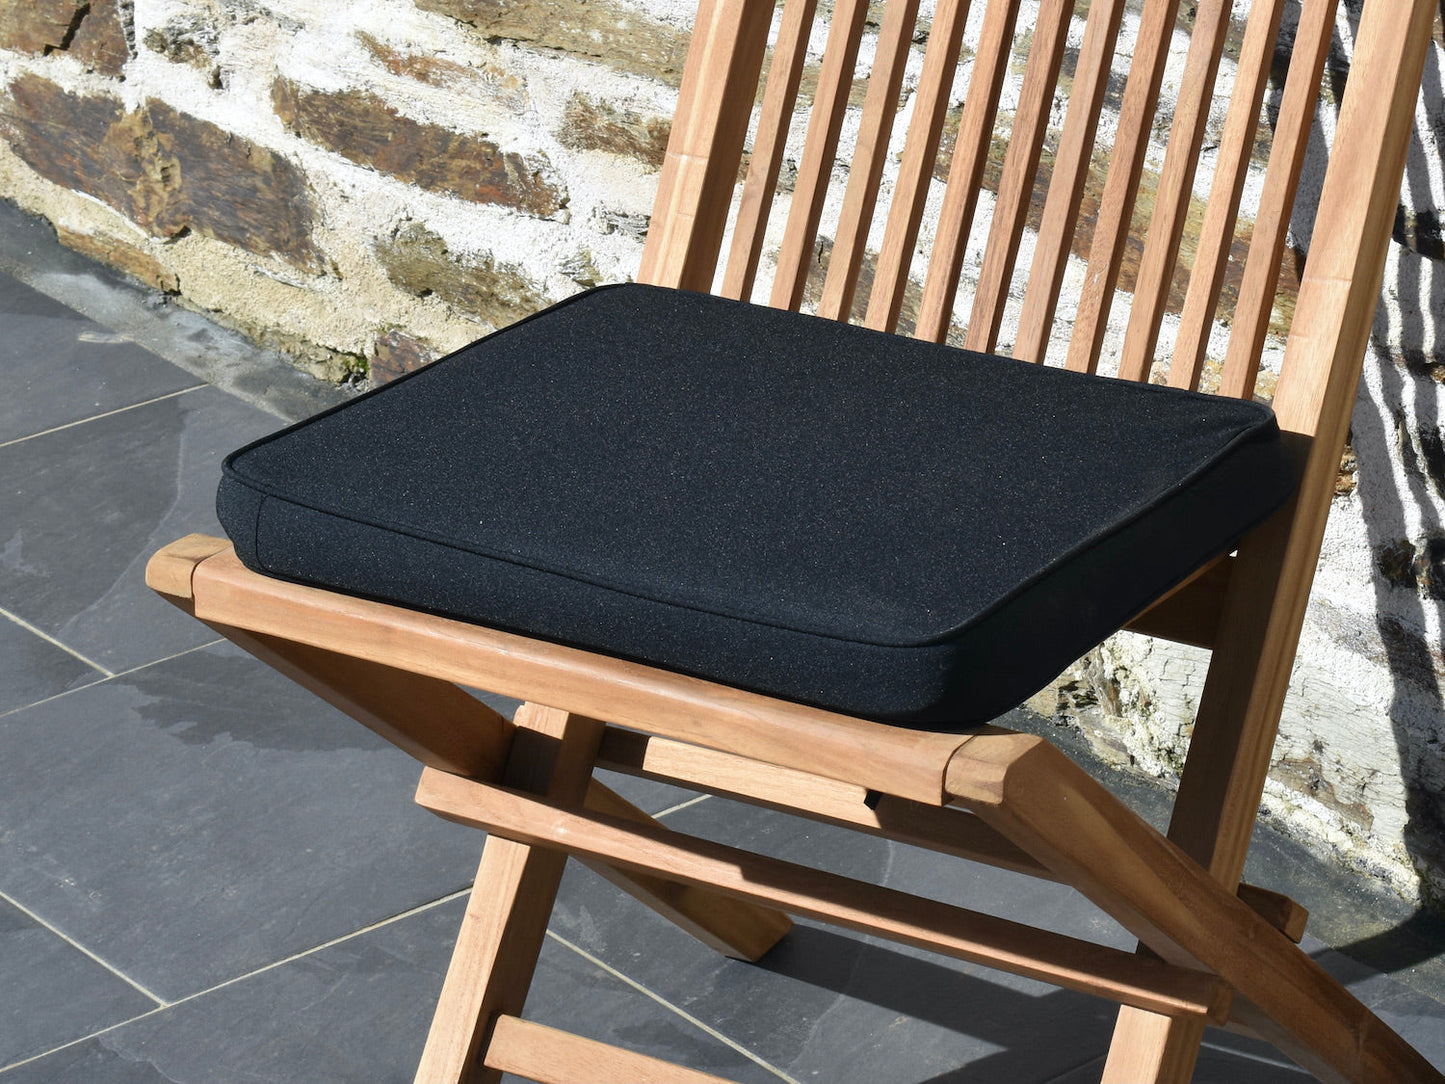 close-up polyester fabric detail of classic black small garden seat pad cushion